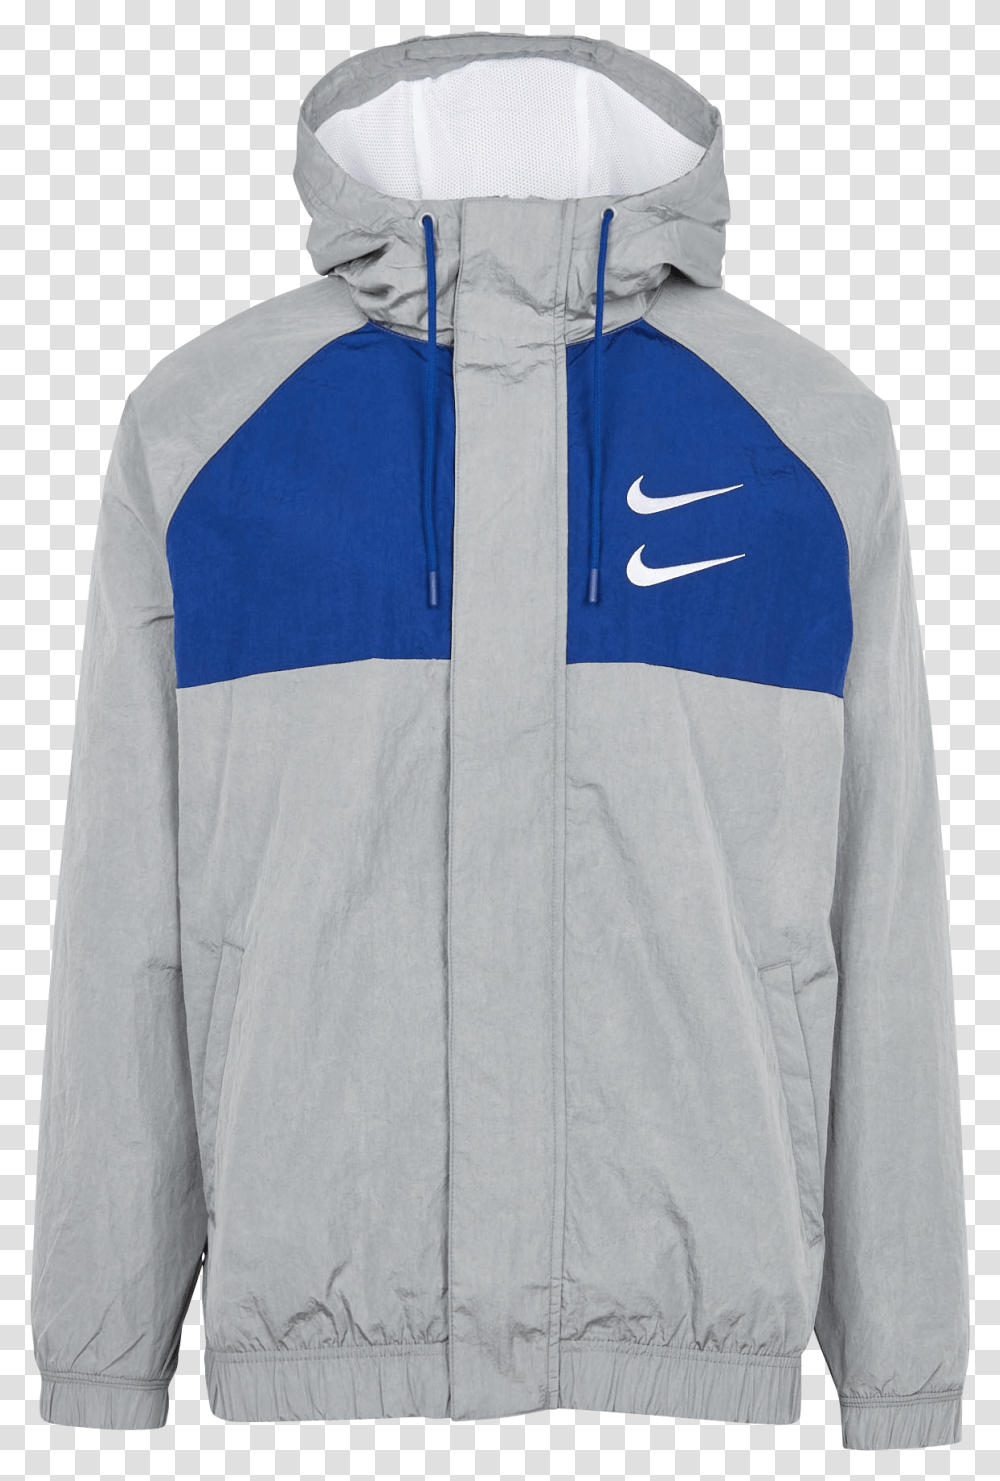 White Nike Jacket With Hood Hooded, Clothing, Apparel, Sweatshirt, Sweater Transparent Png